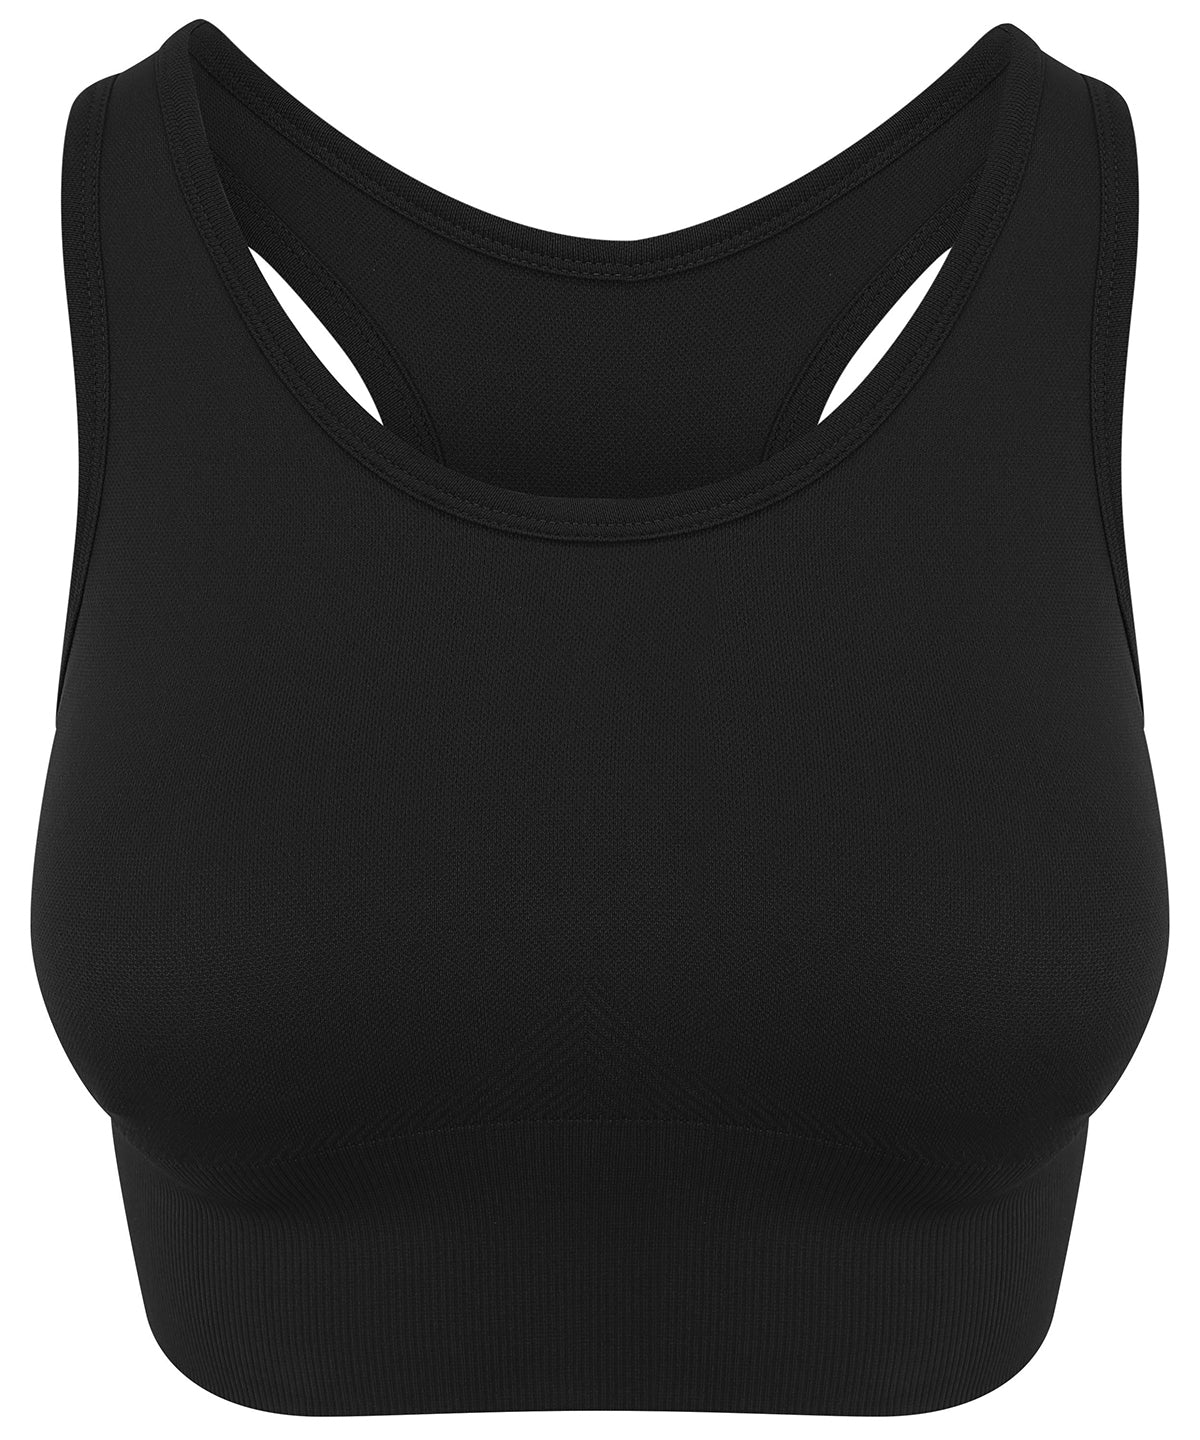 Performance Sports Bras: Custom Designs & Unmatched Support